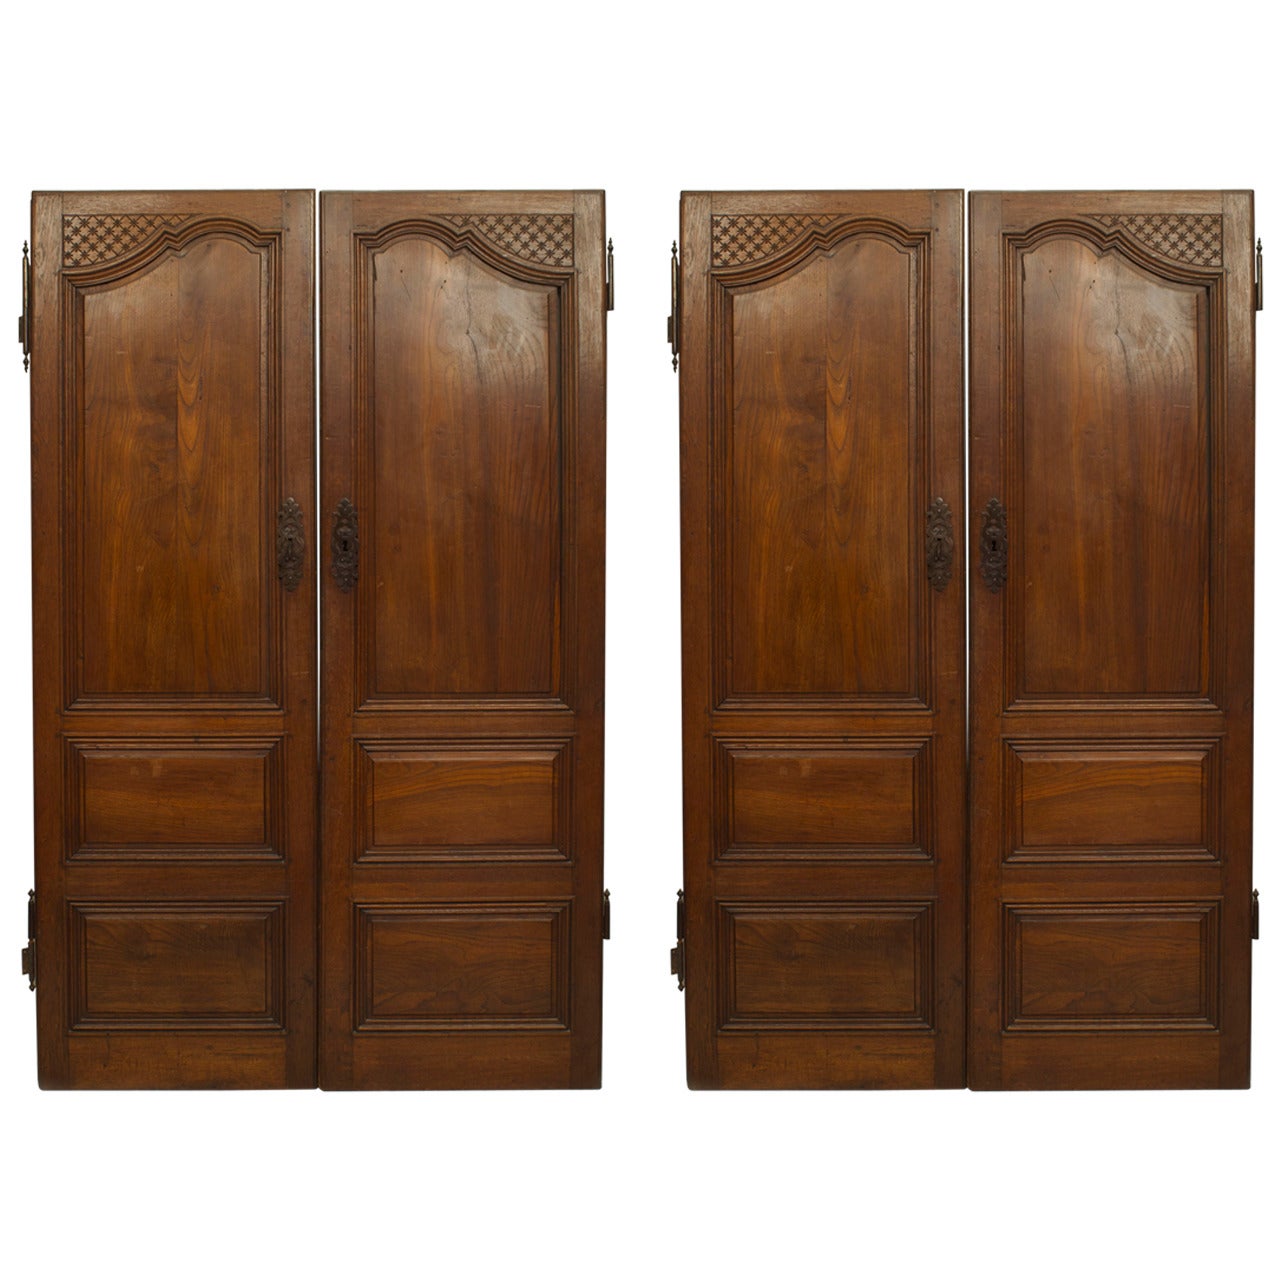 Pair of French Provincial Carved Walnut Doors